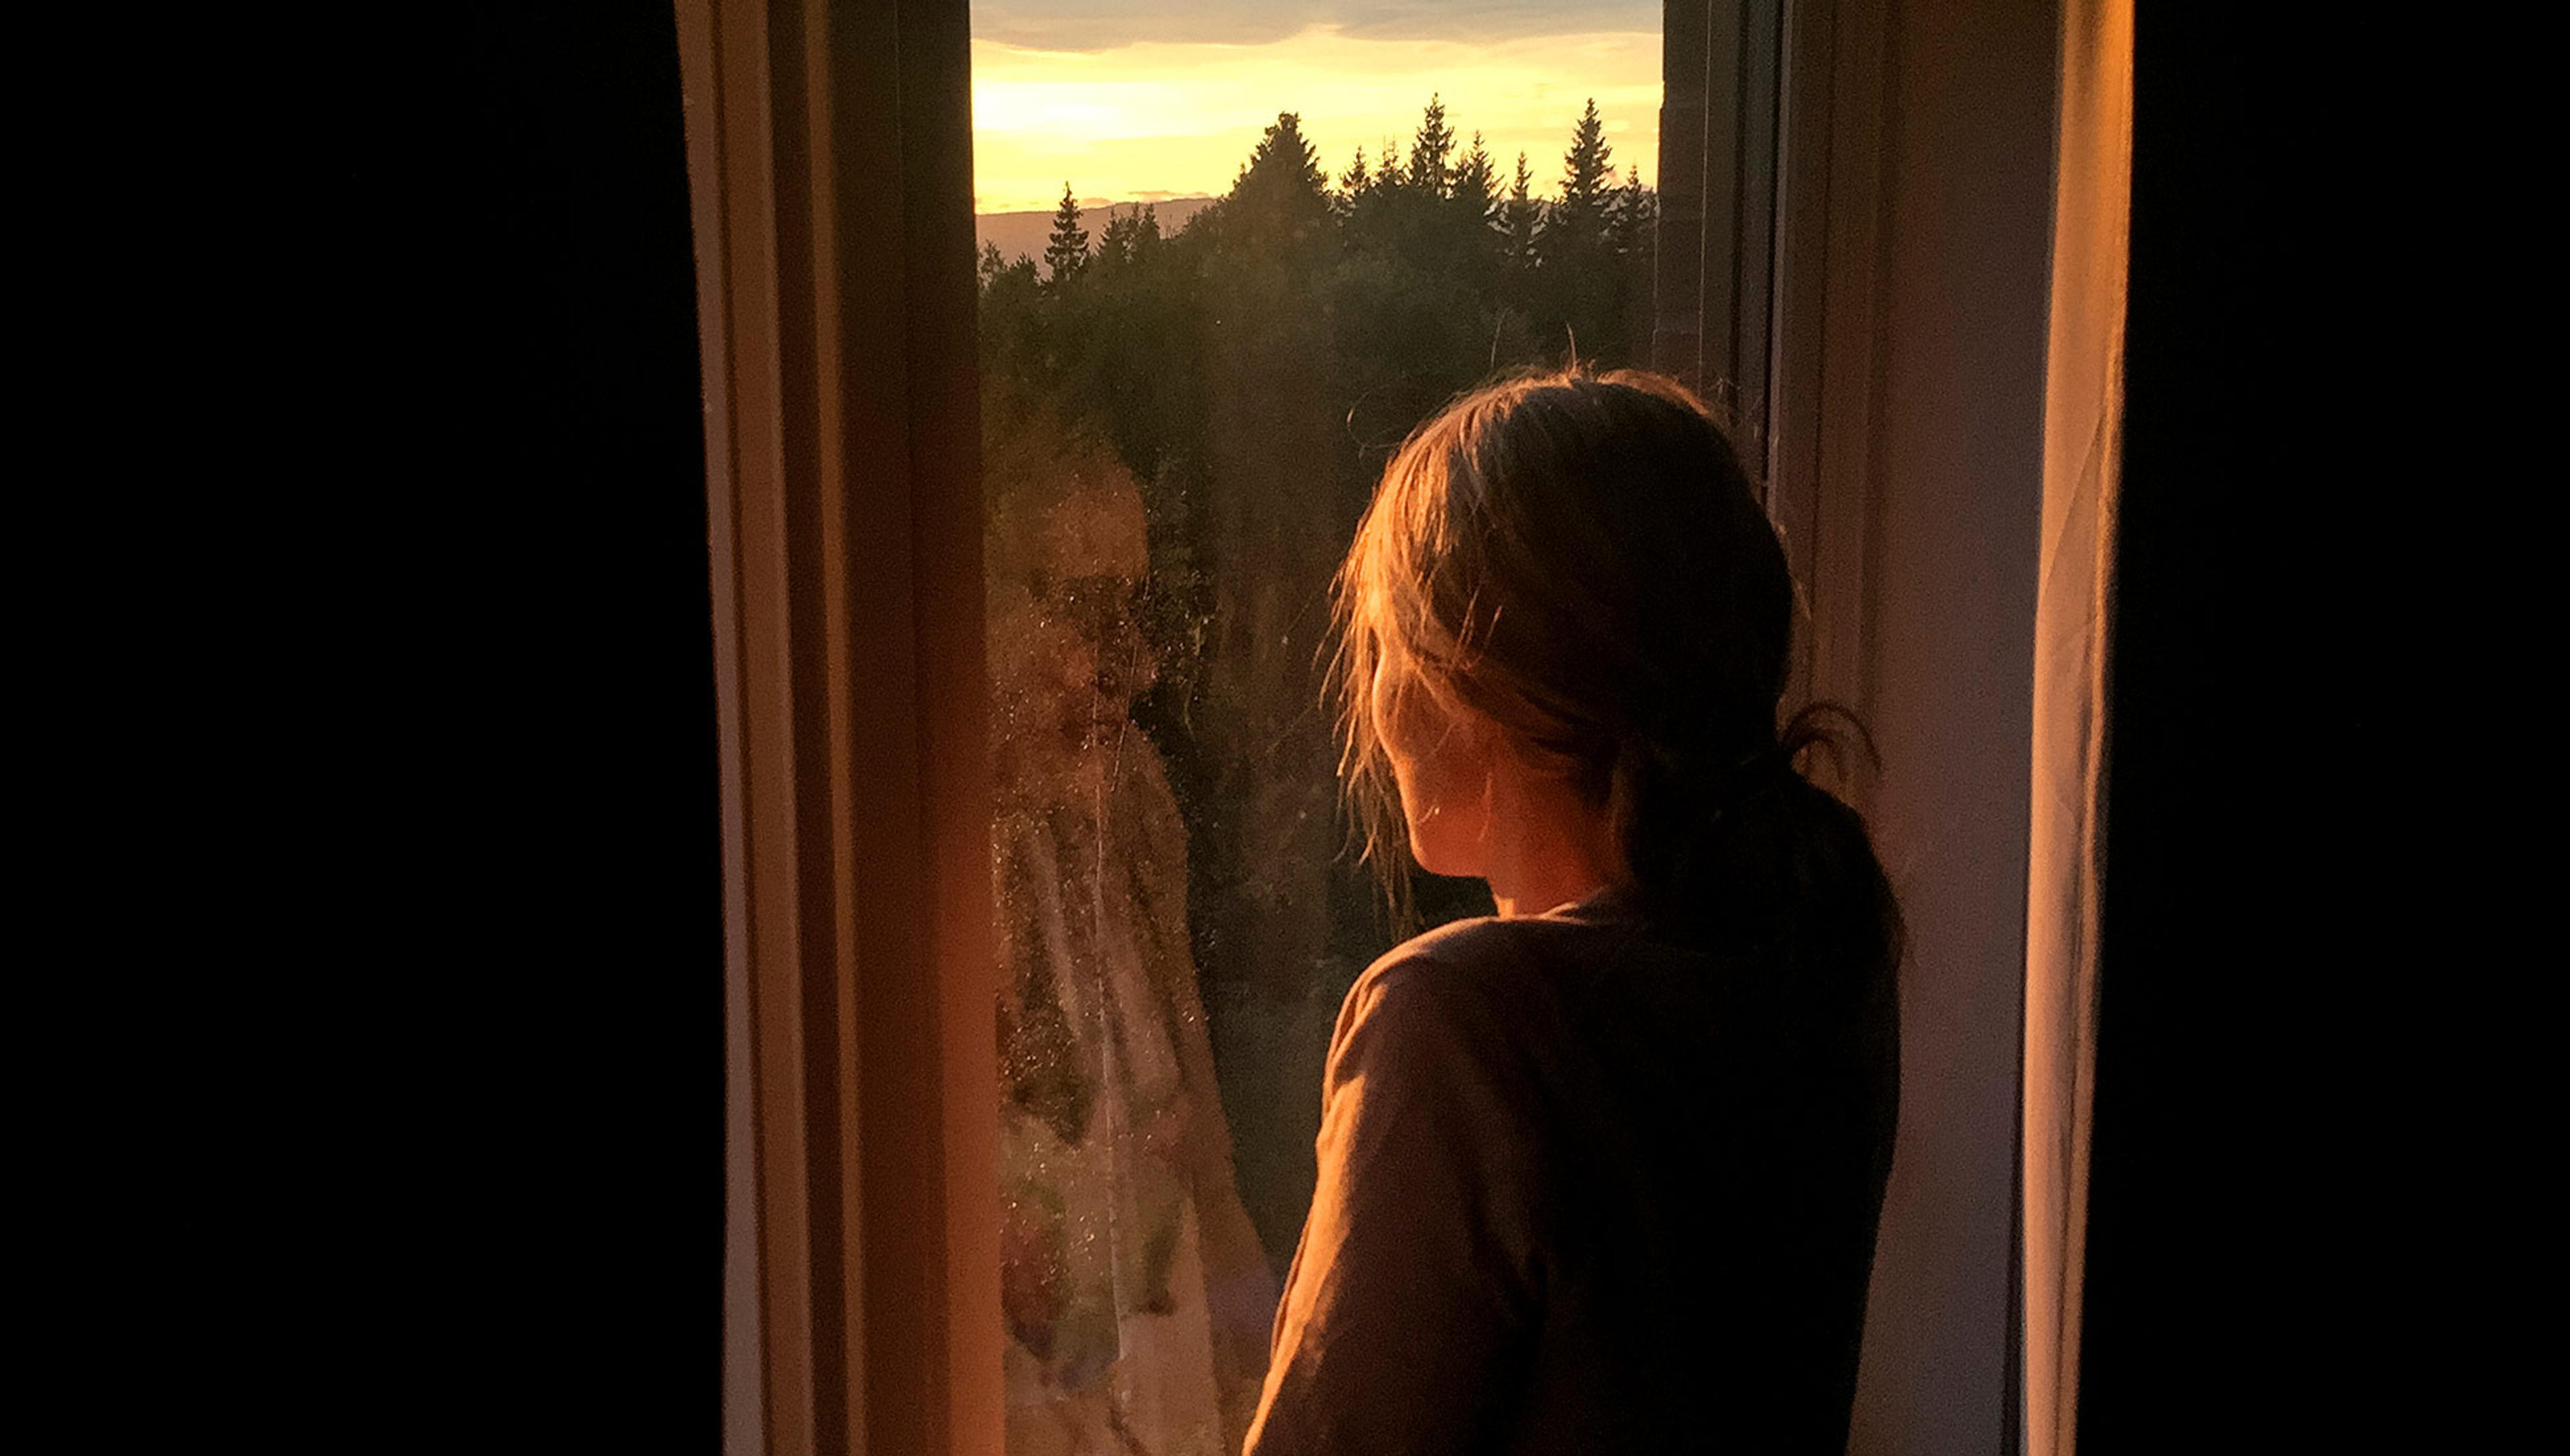 A woman seen from behind and bathed in dawn light is looking out through a window to a forest